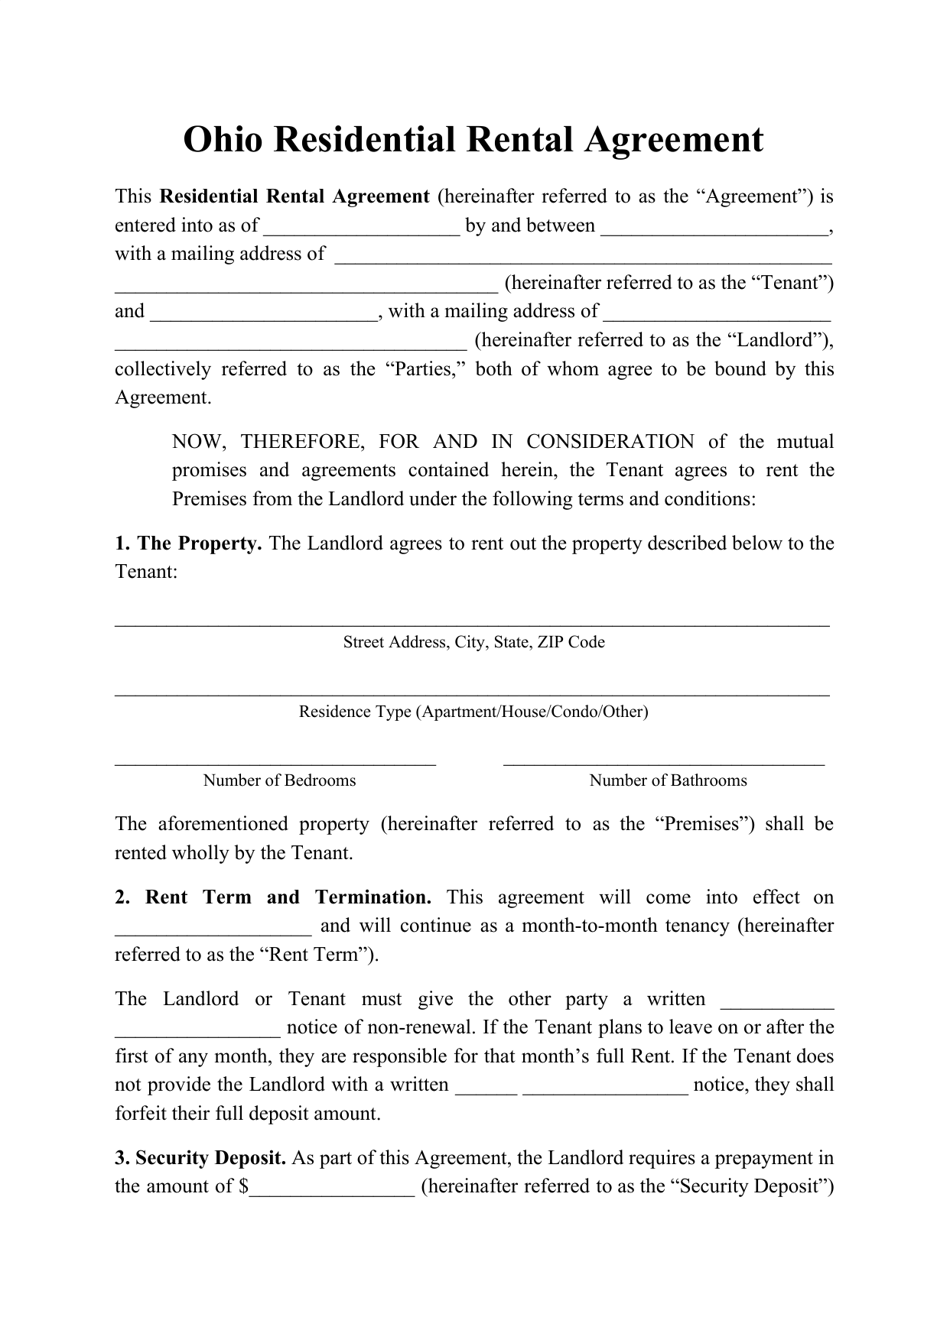 Residential Rental Agreement Template - Ohio, Page 1